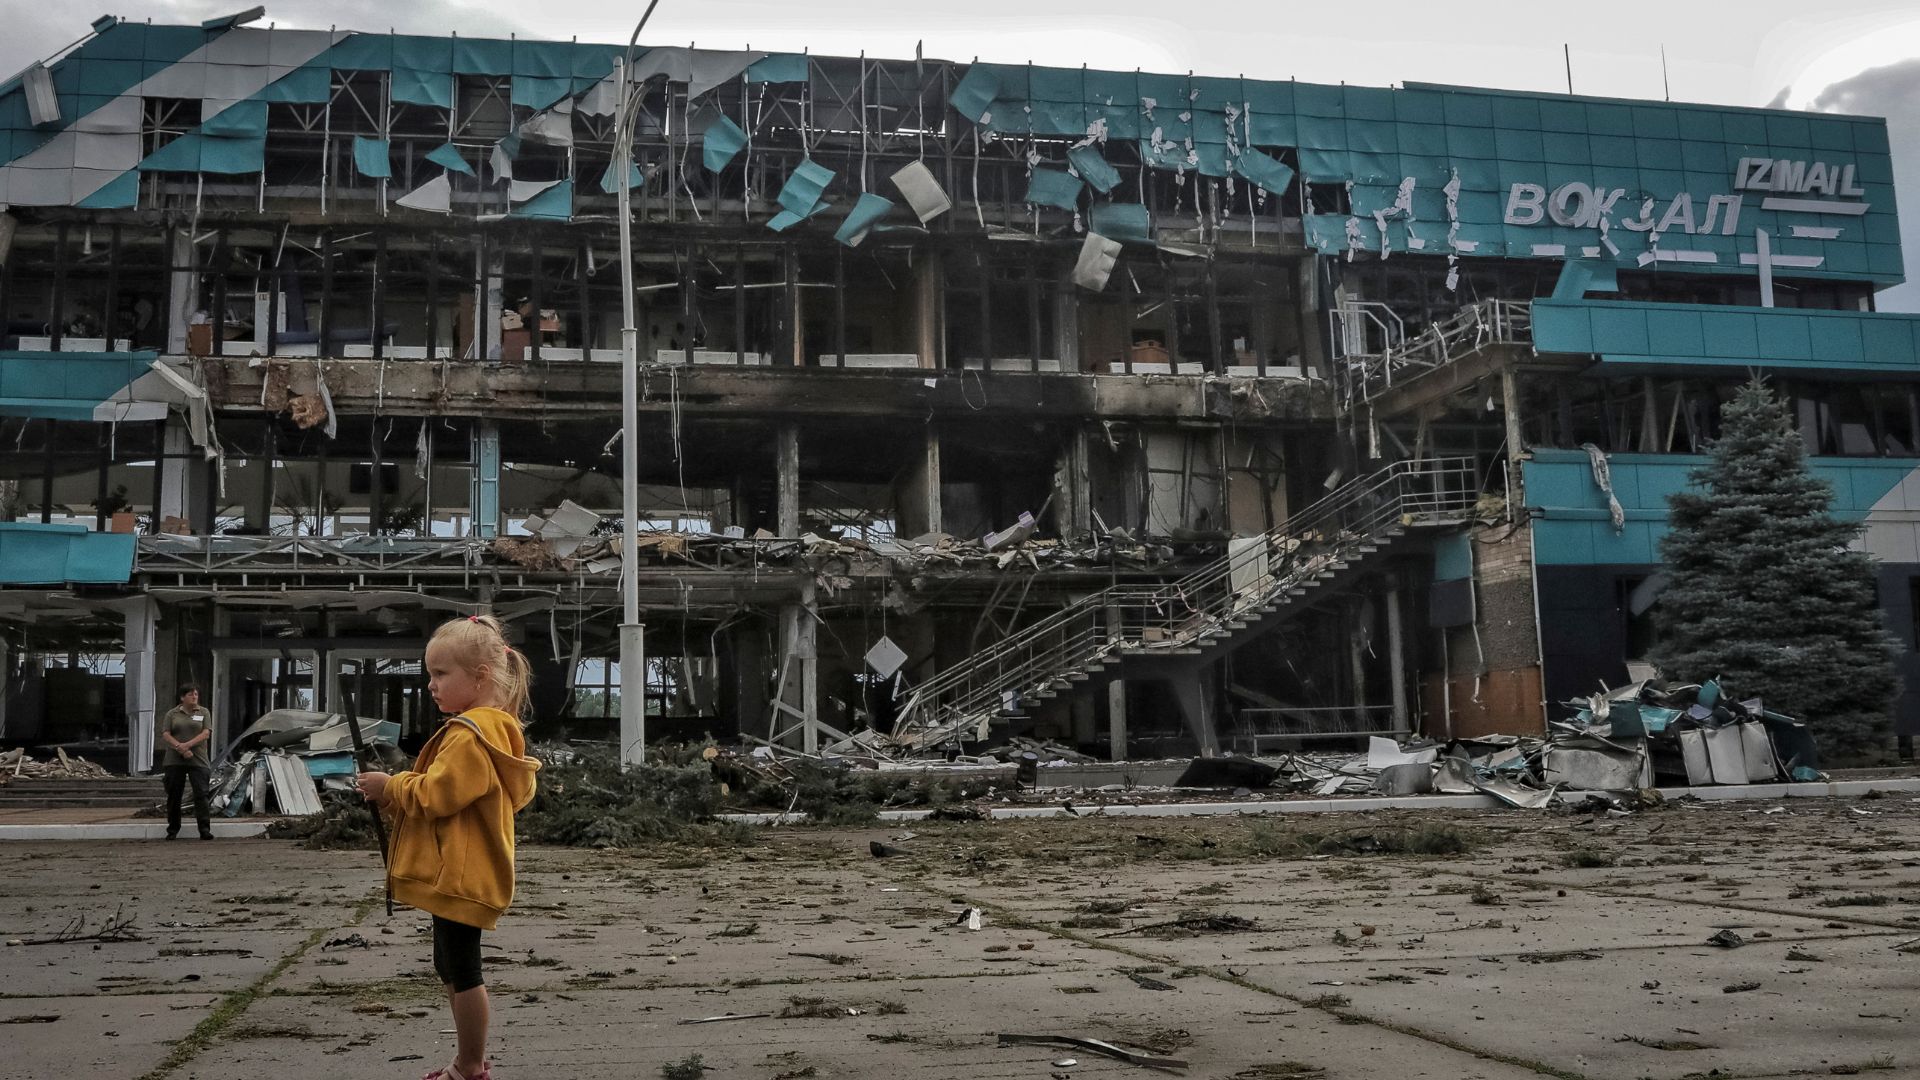 The marine station building in Izmail, Ukraine was destroyed during a recent Russian drone strike./Nina Liashenko/Reuters